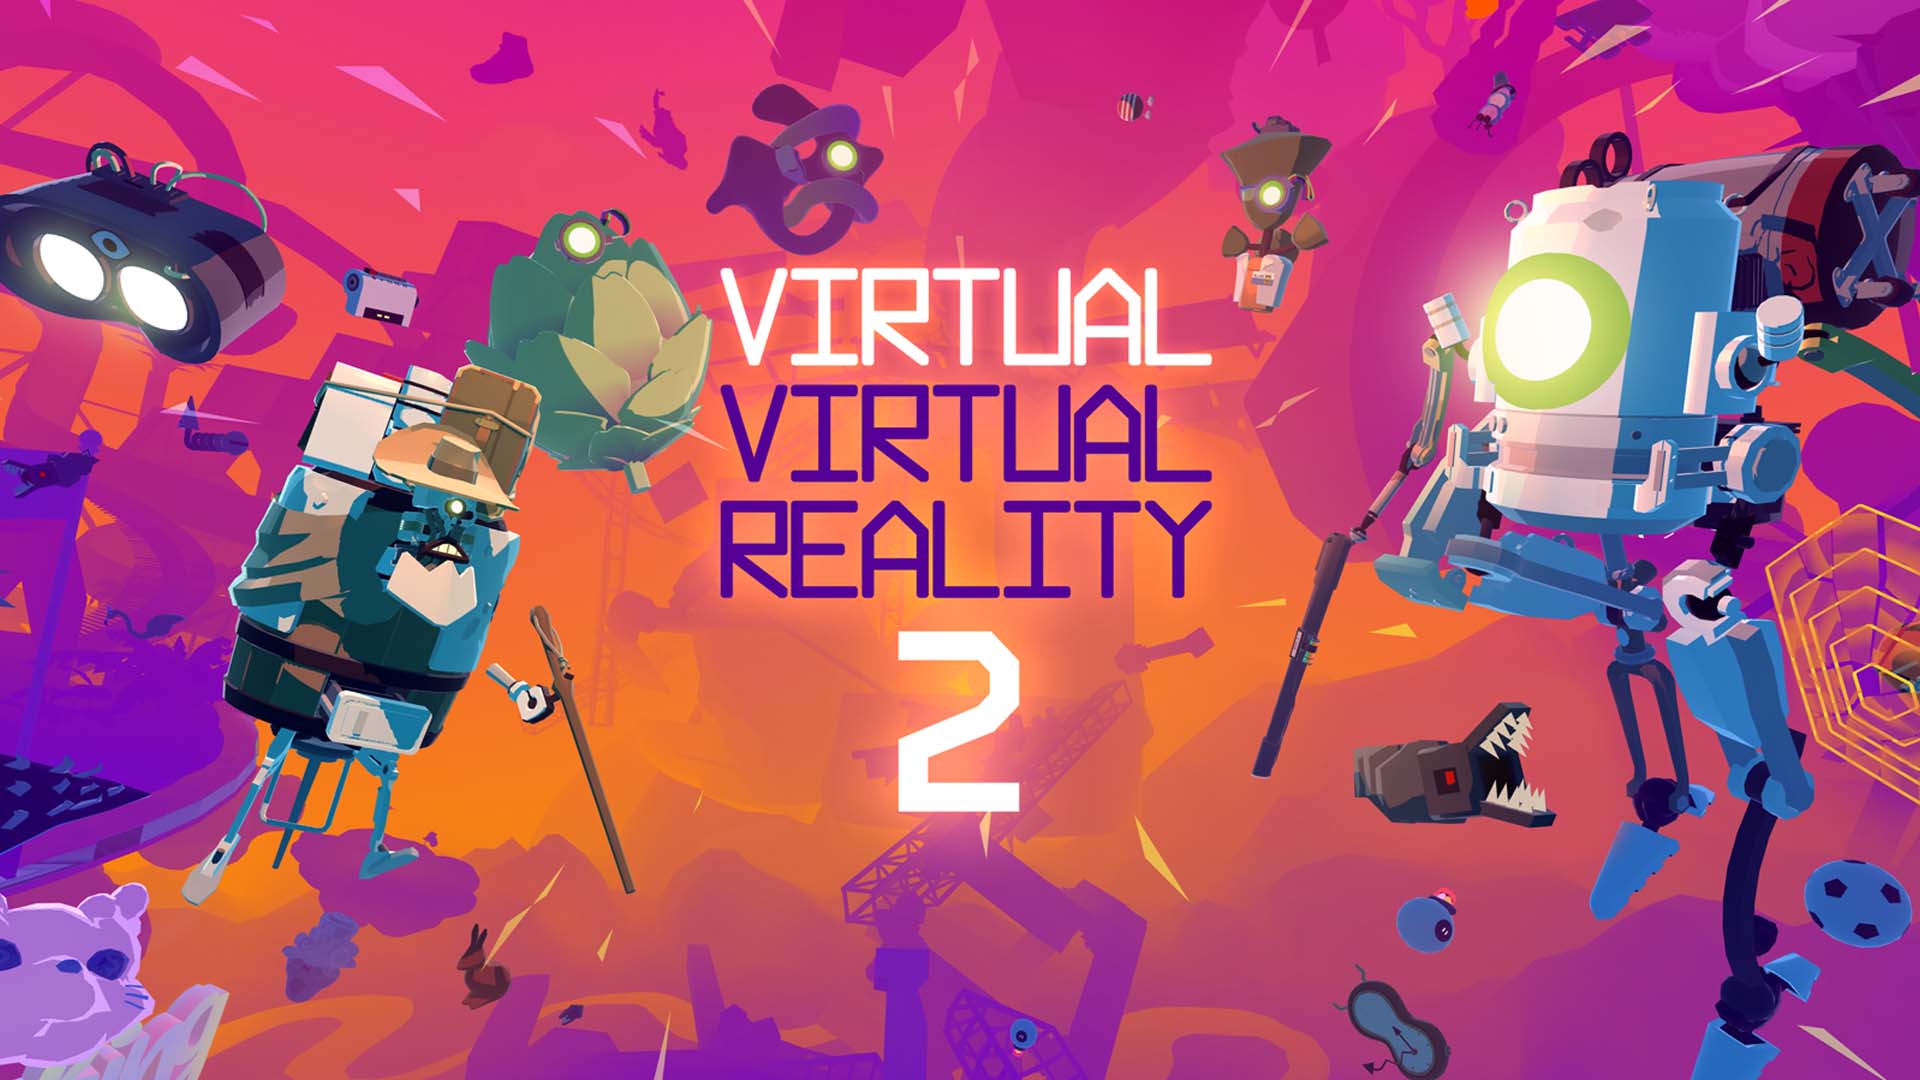 virtual-virtual-reality-2-is-coming-an-iconic-game-returns